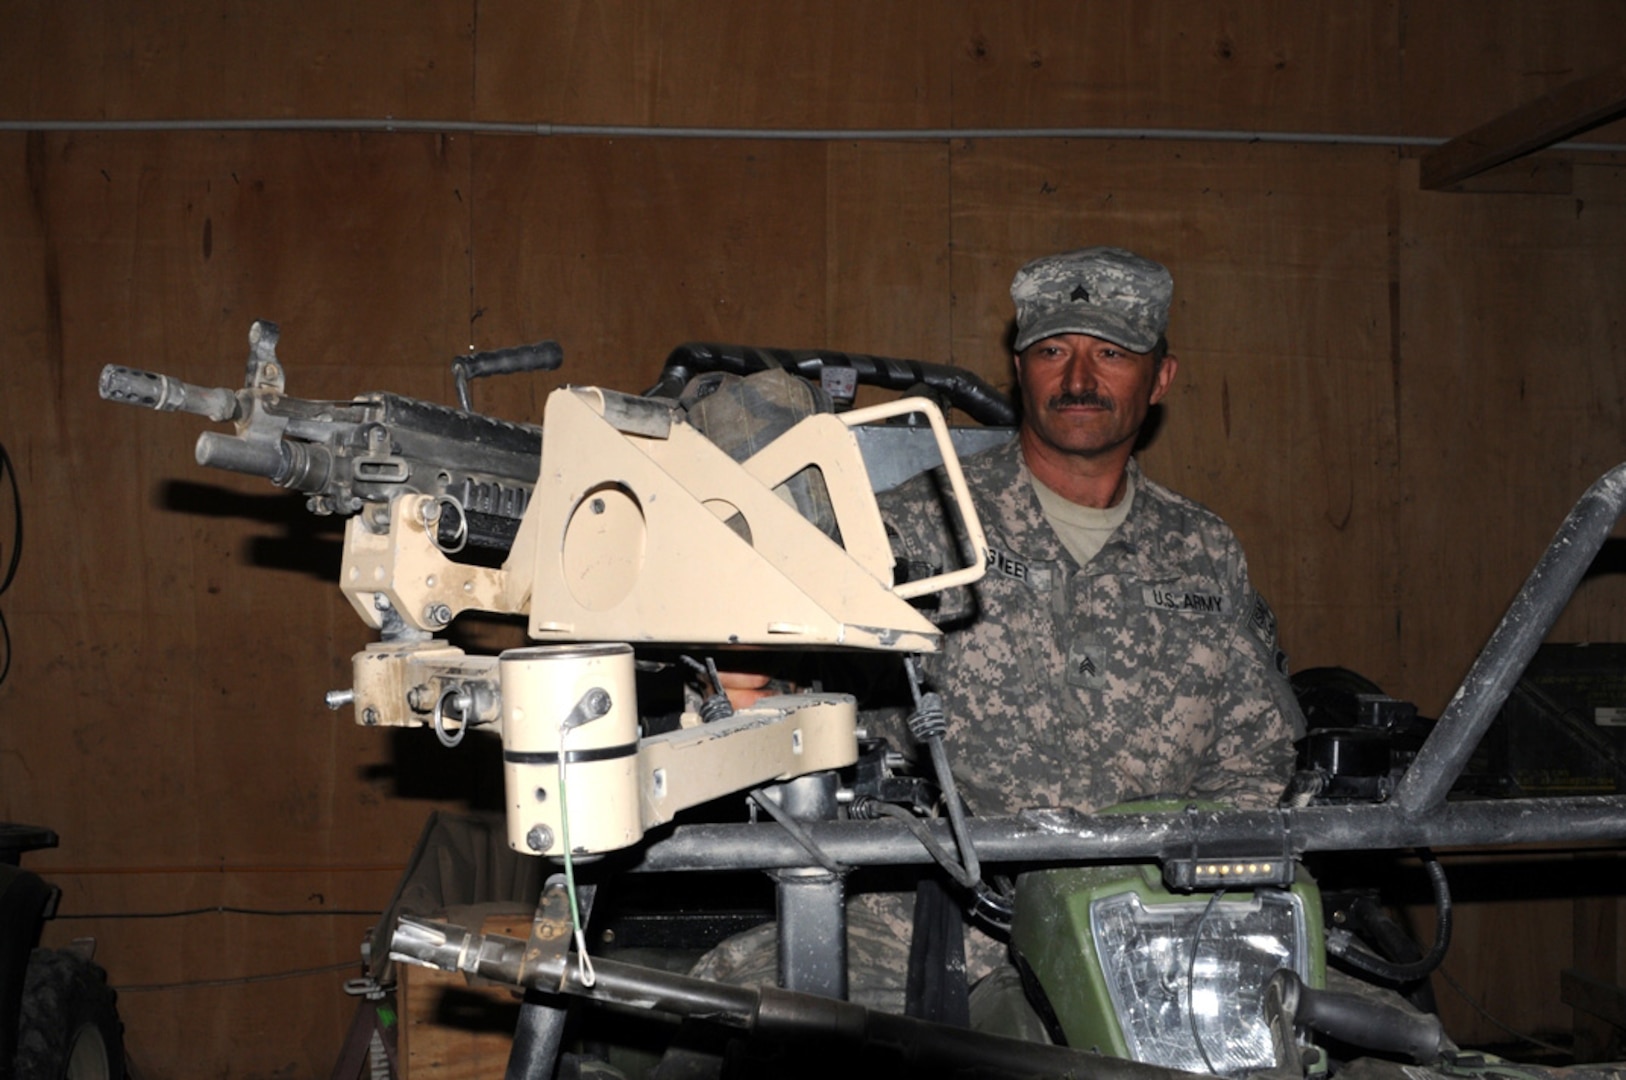 U.S. Army Sgt. Theodore Sweet, a welder with Company E, 3rd Battalion of the 172nd Infantry Regiment stands behind a mount for an M240B that he created for an all-terrain vehicle, May 18. The mount was used during a fire fight by special forces Soldiers recently. Sweet, of Burke, N.Y., welds this and many inventions from scrap metal that would normally be made by industrial machinery at his metal shop on Forward Operating Base Lightning.